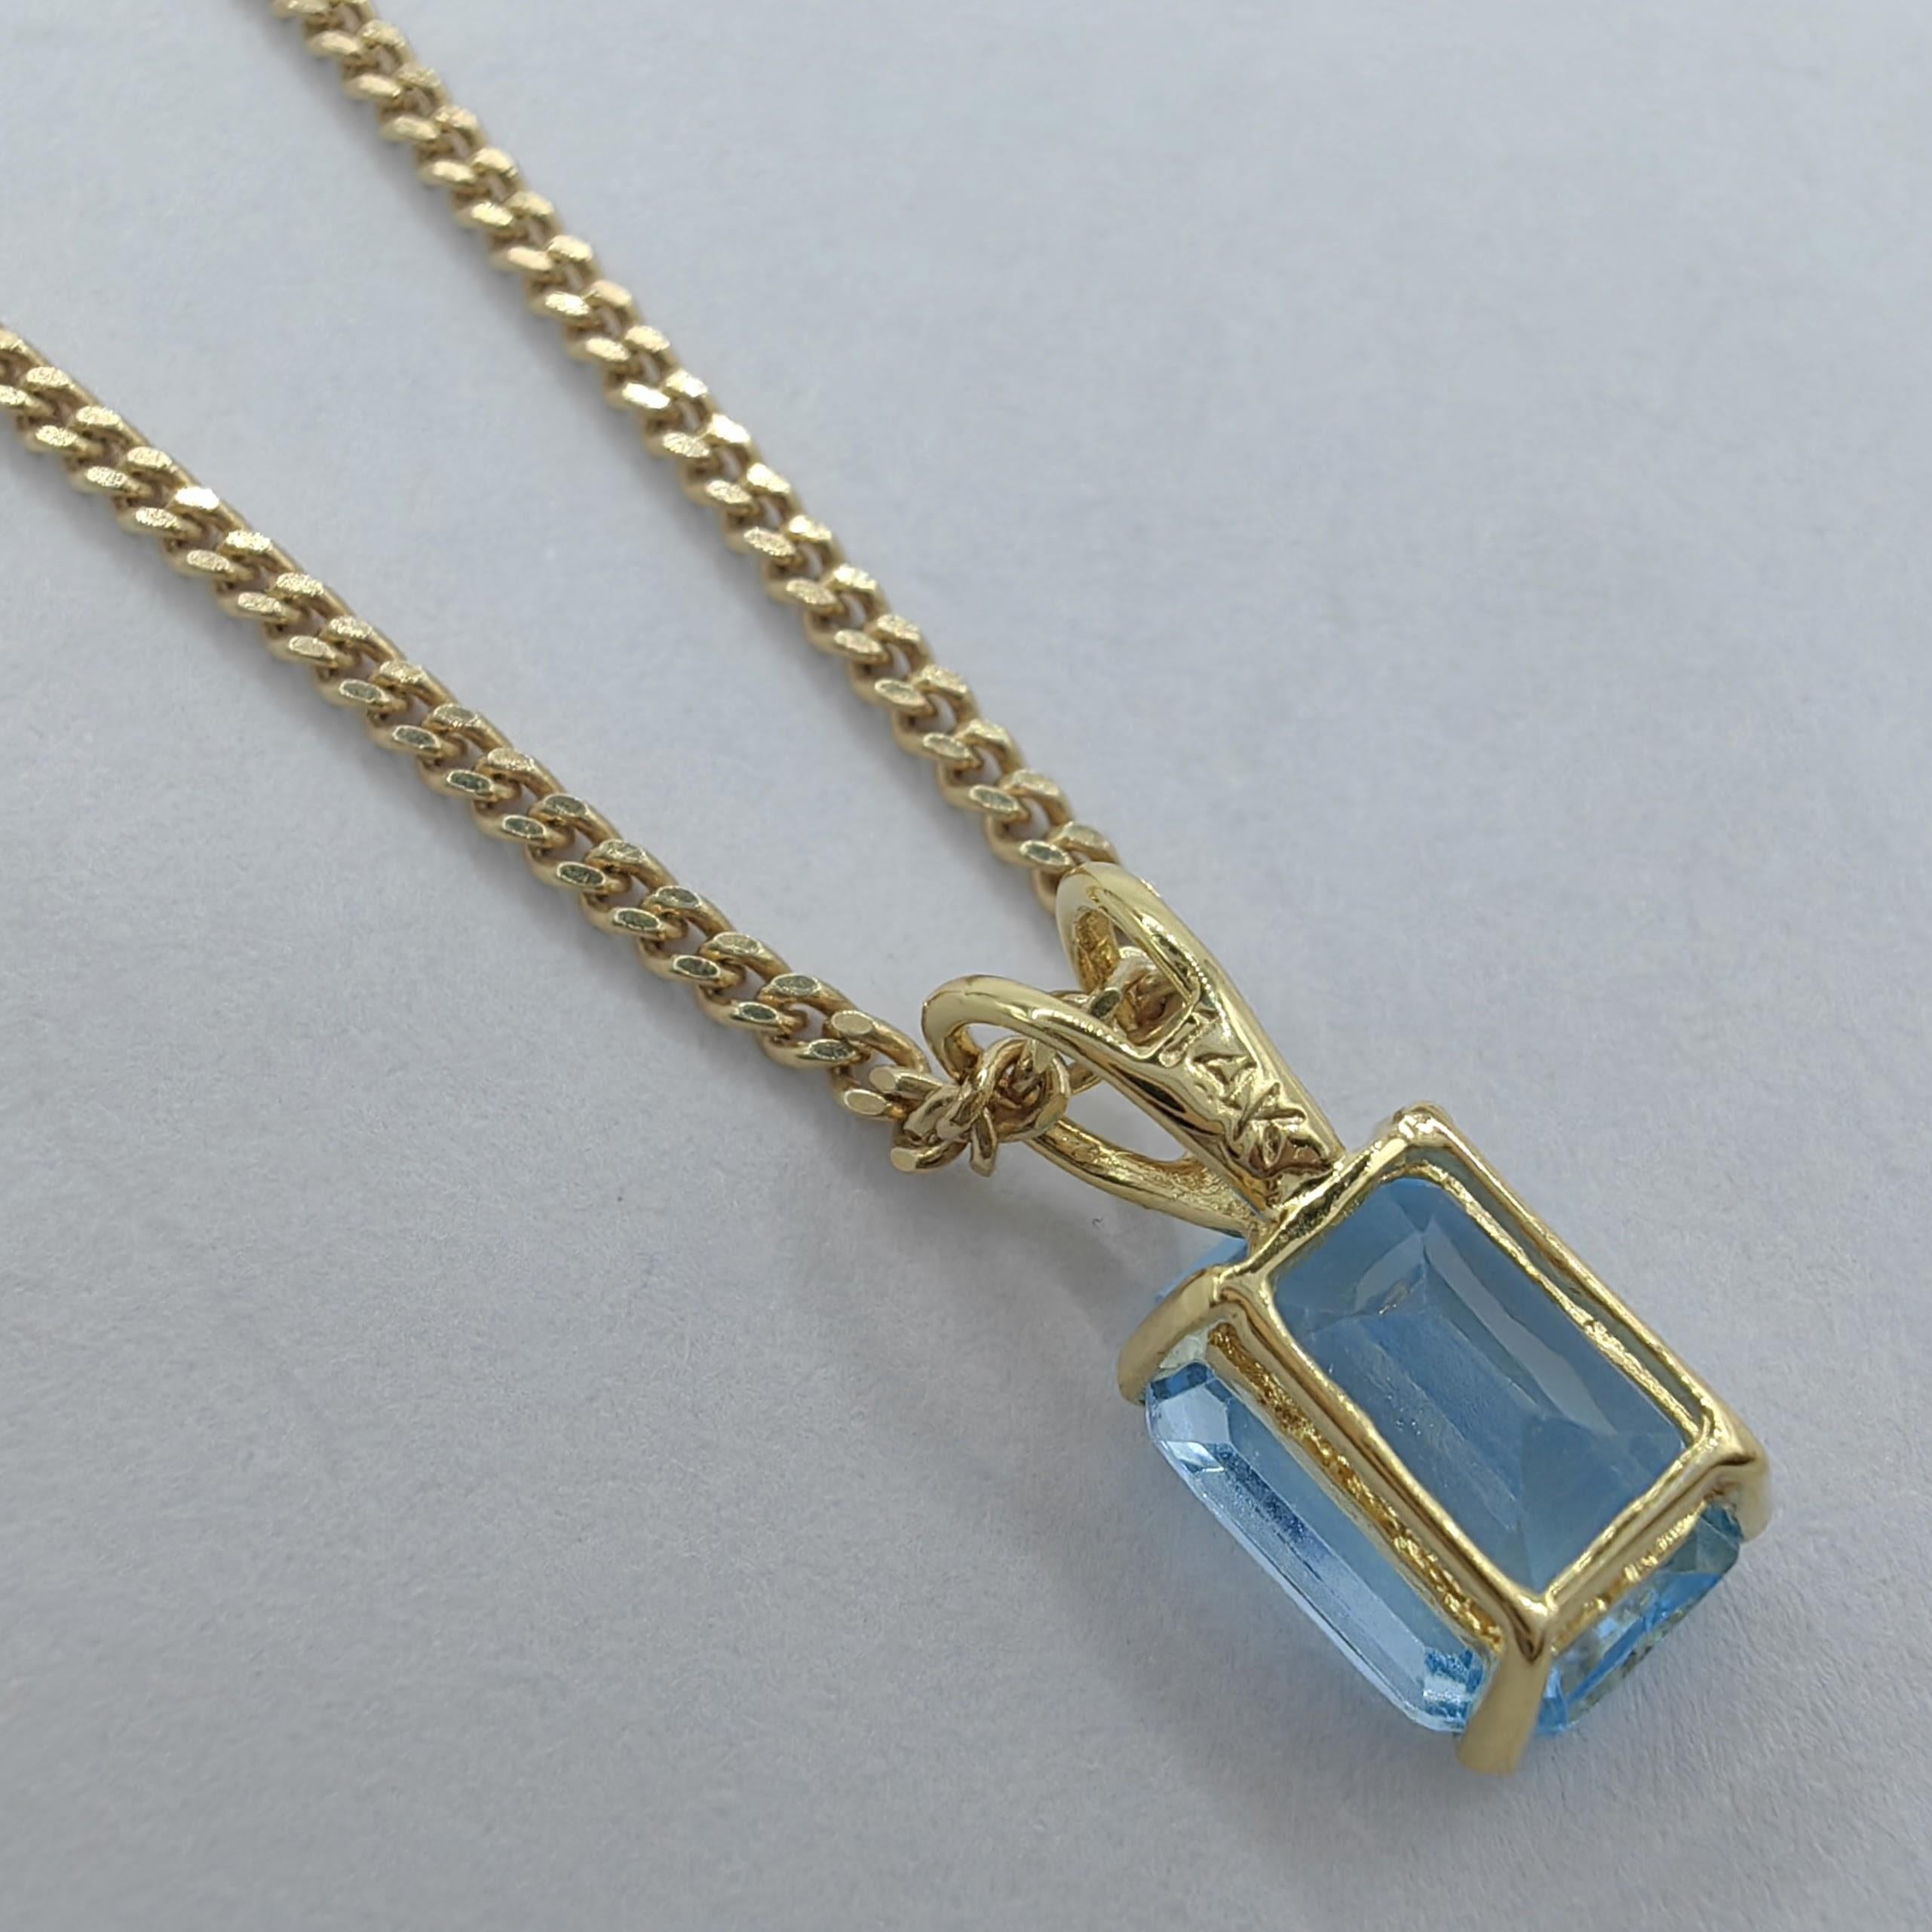 Contemporary Vintage 1980's Emerald Cut Blue Topaz Necklace Pendant in 14K Yellow Gold #1 For Sale